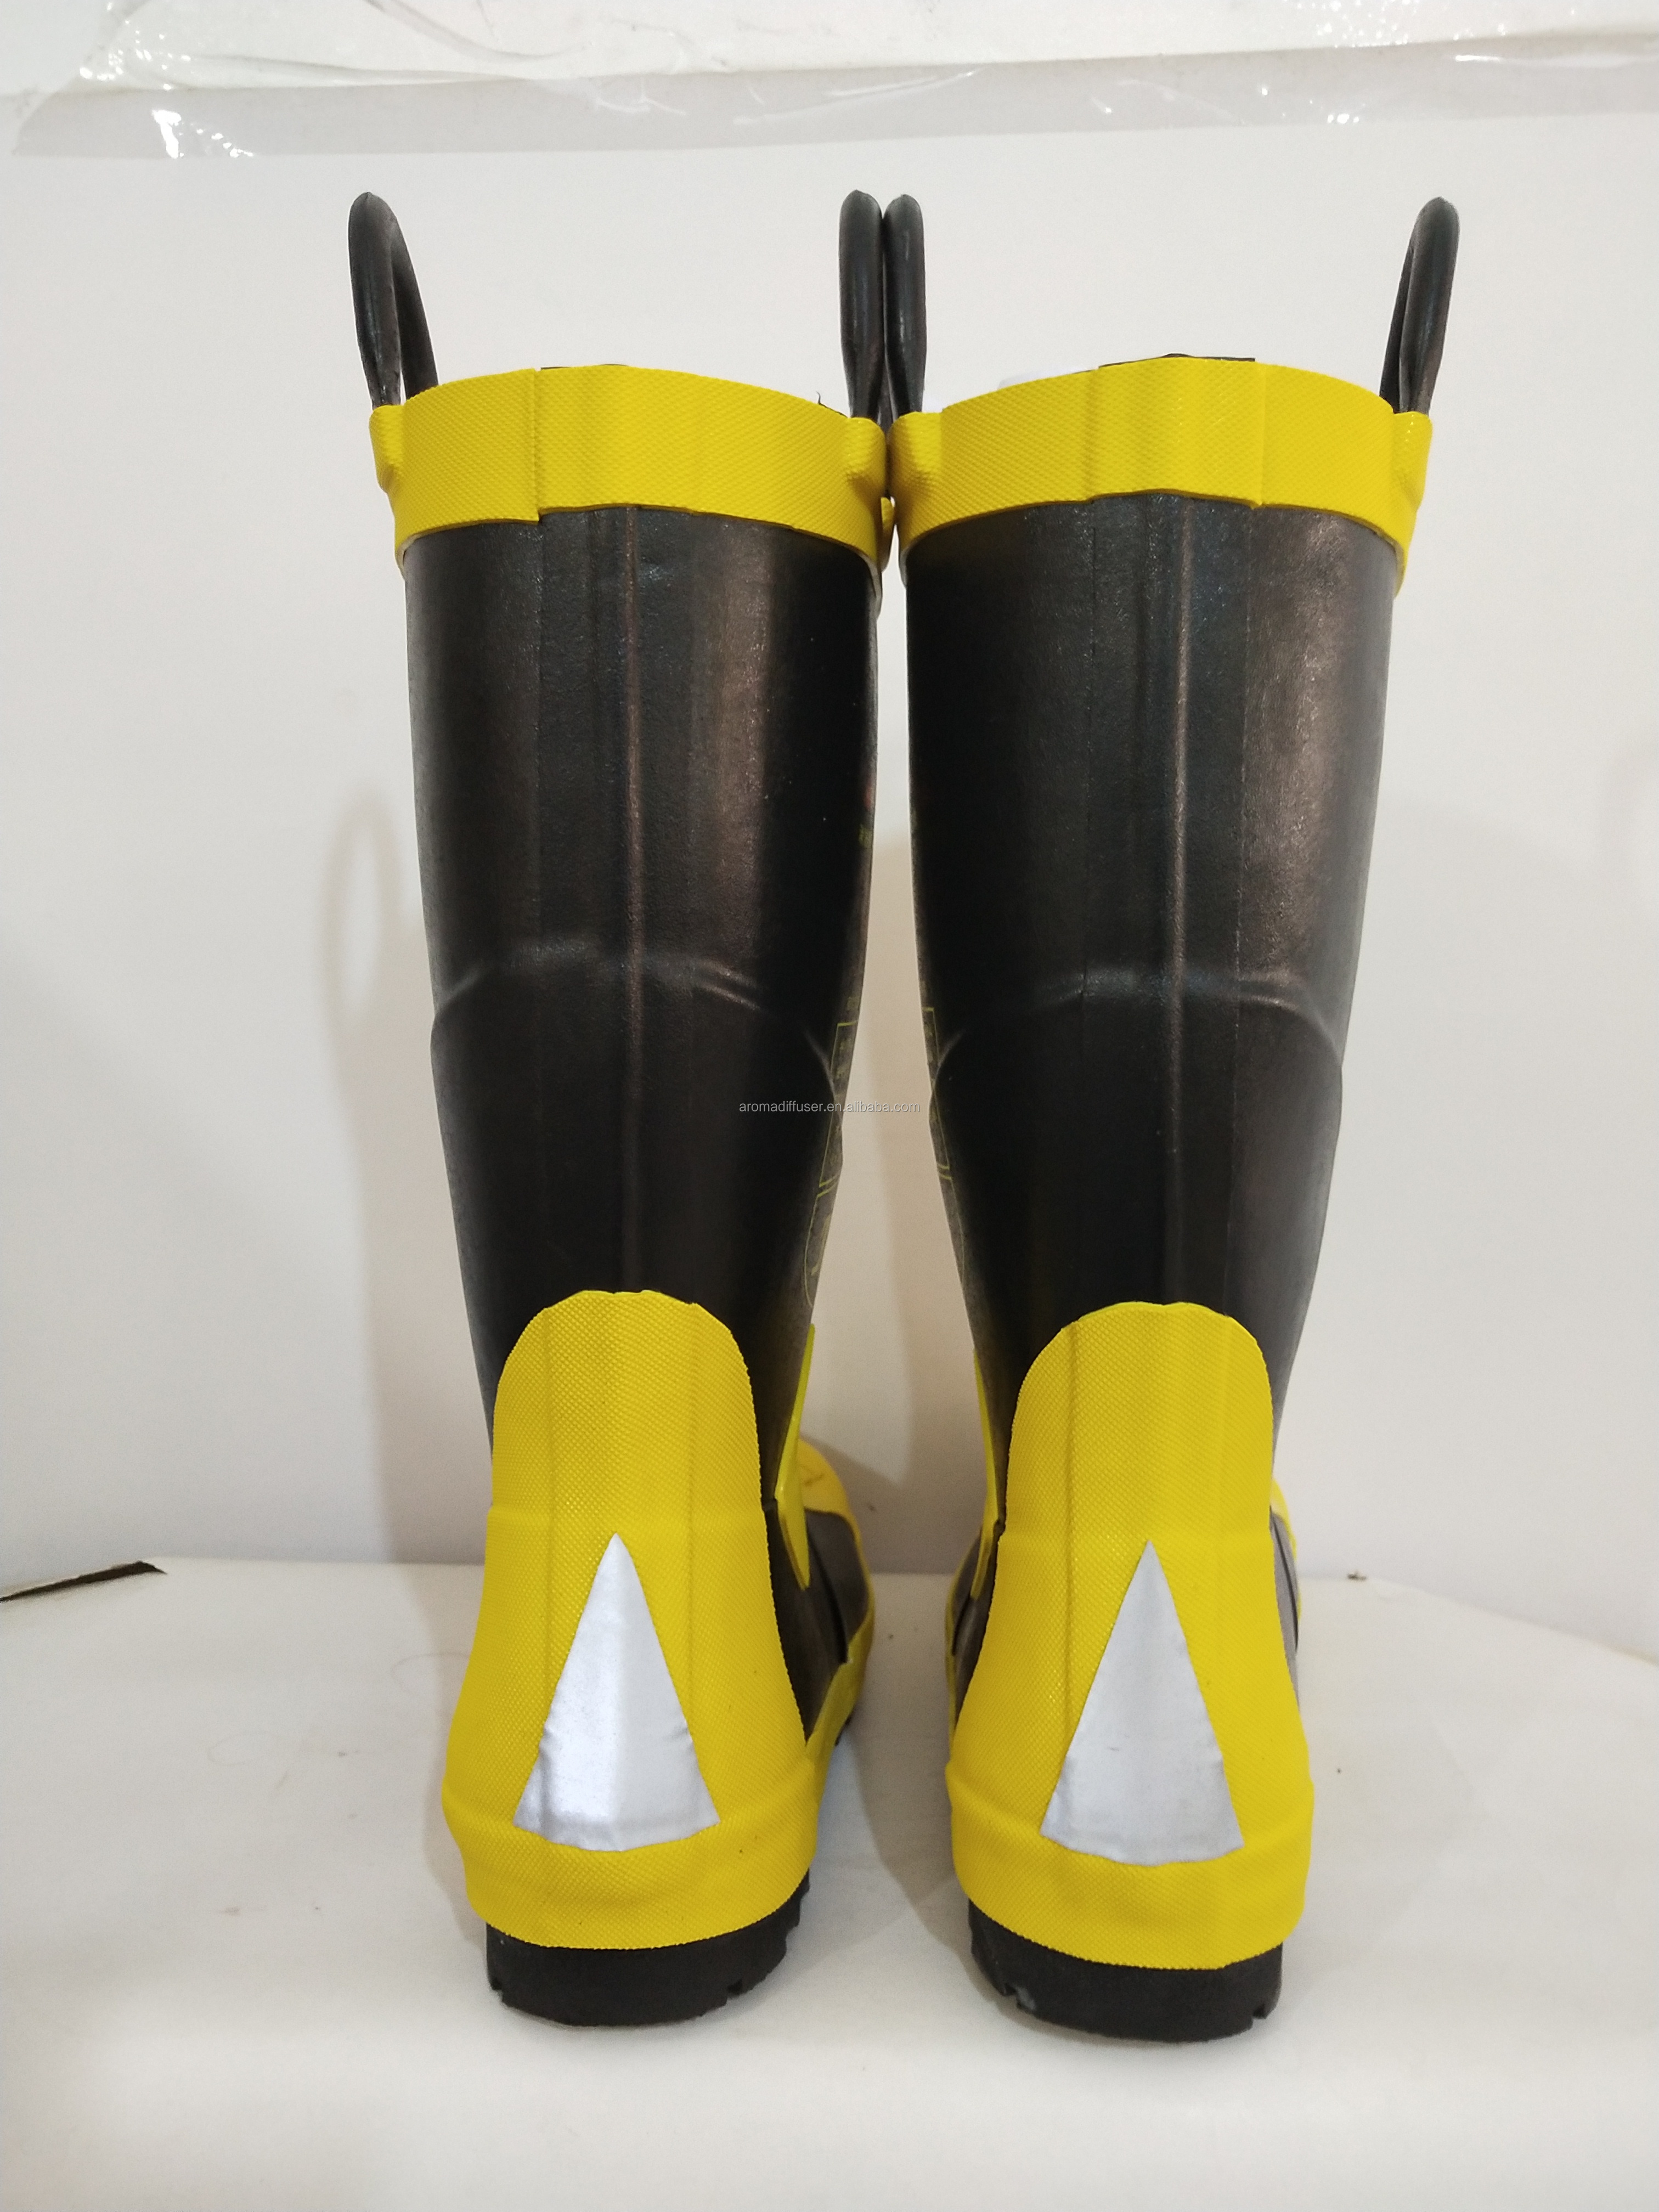 manufacture produced fire boots